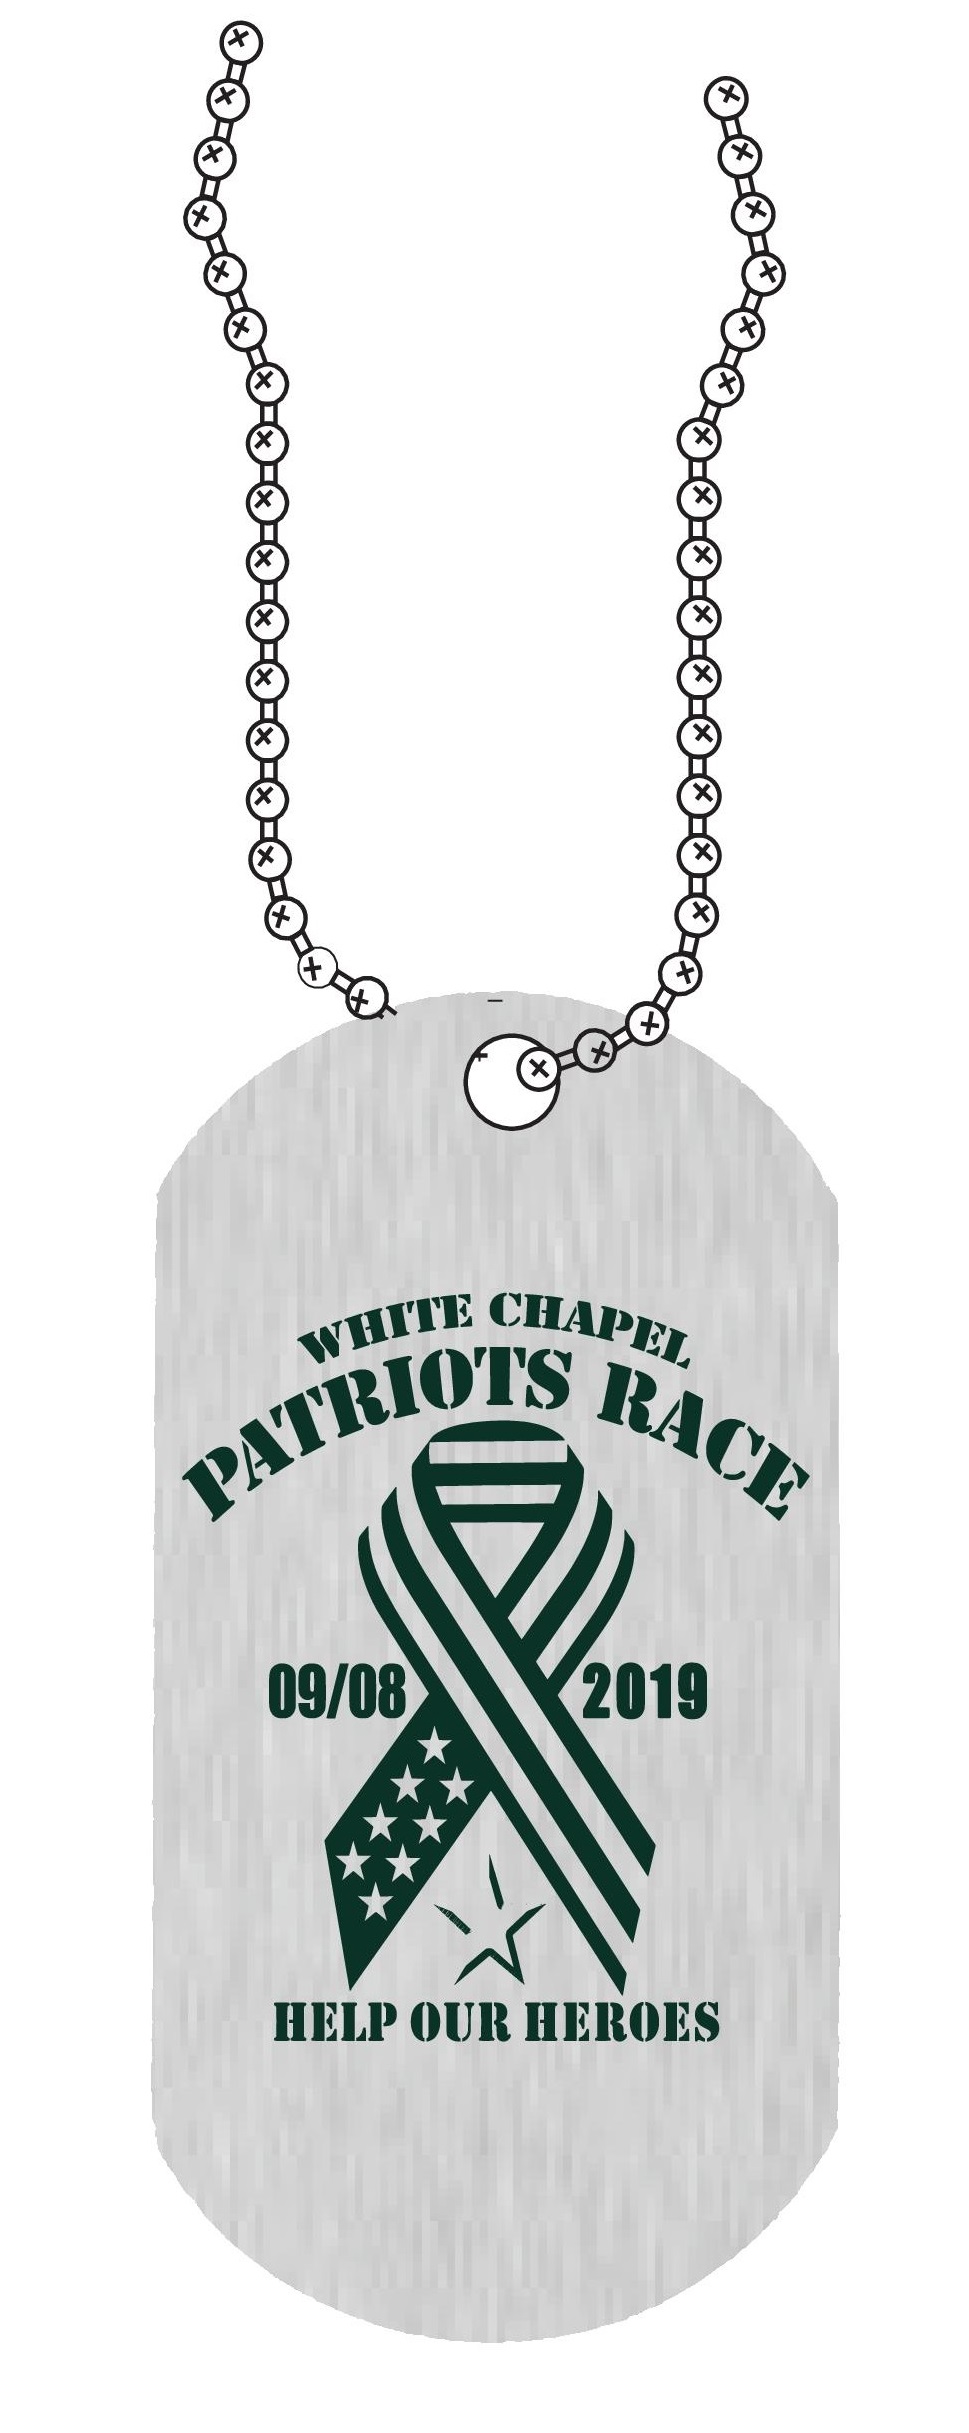 2019 Patriots Race_Finisher Medal